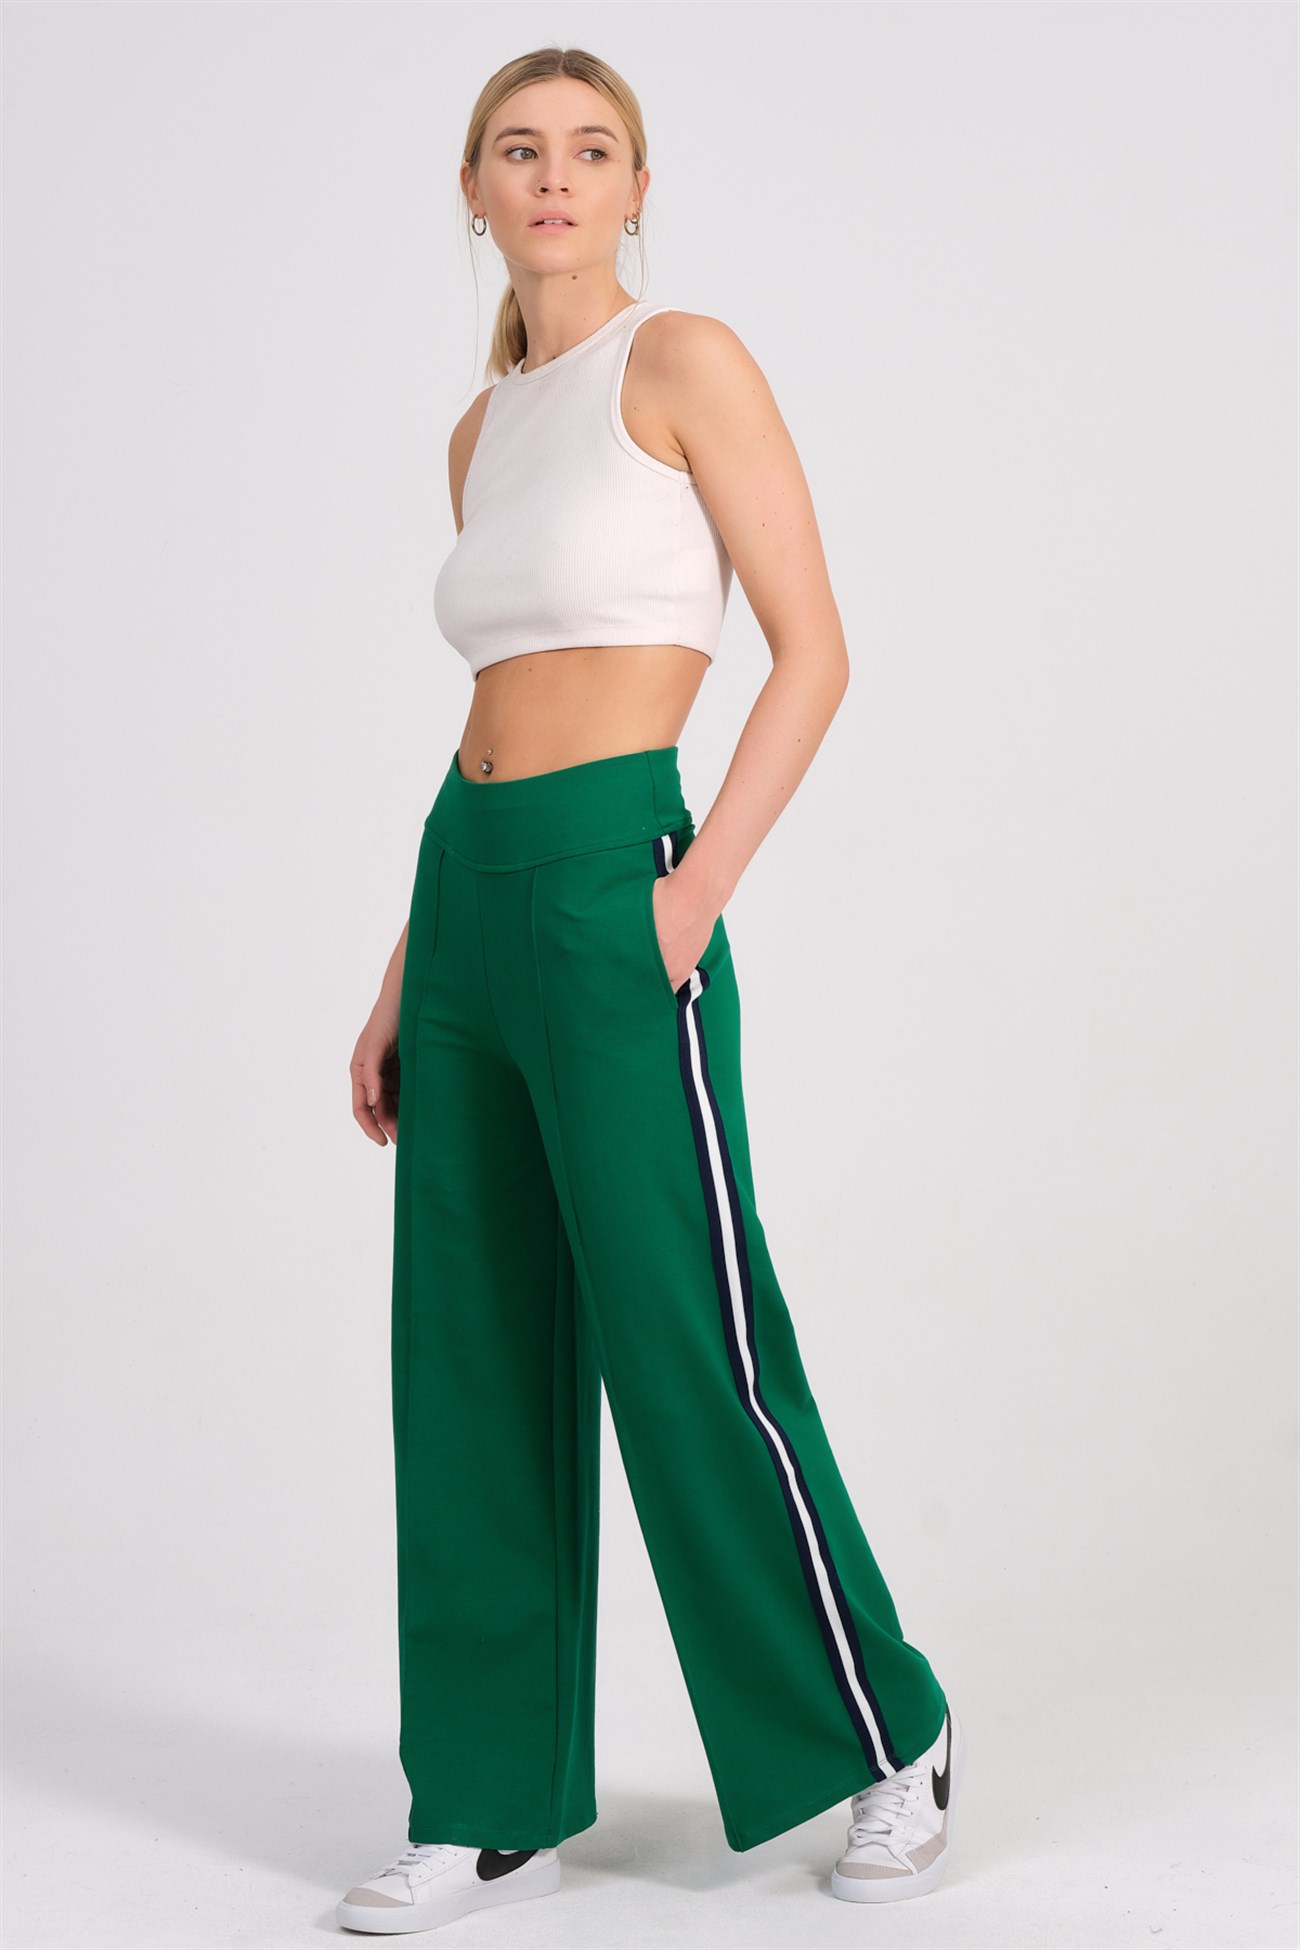 IVY Benetton Green Knit Flare Pants